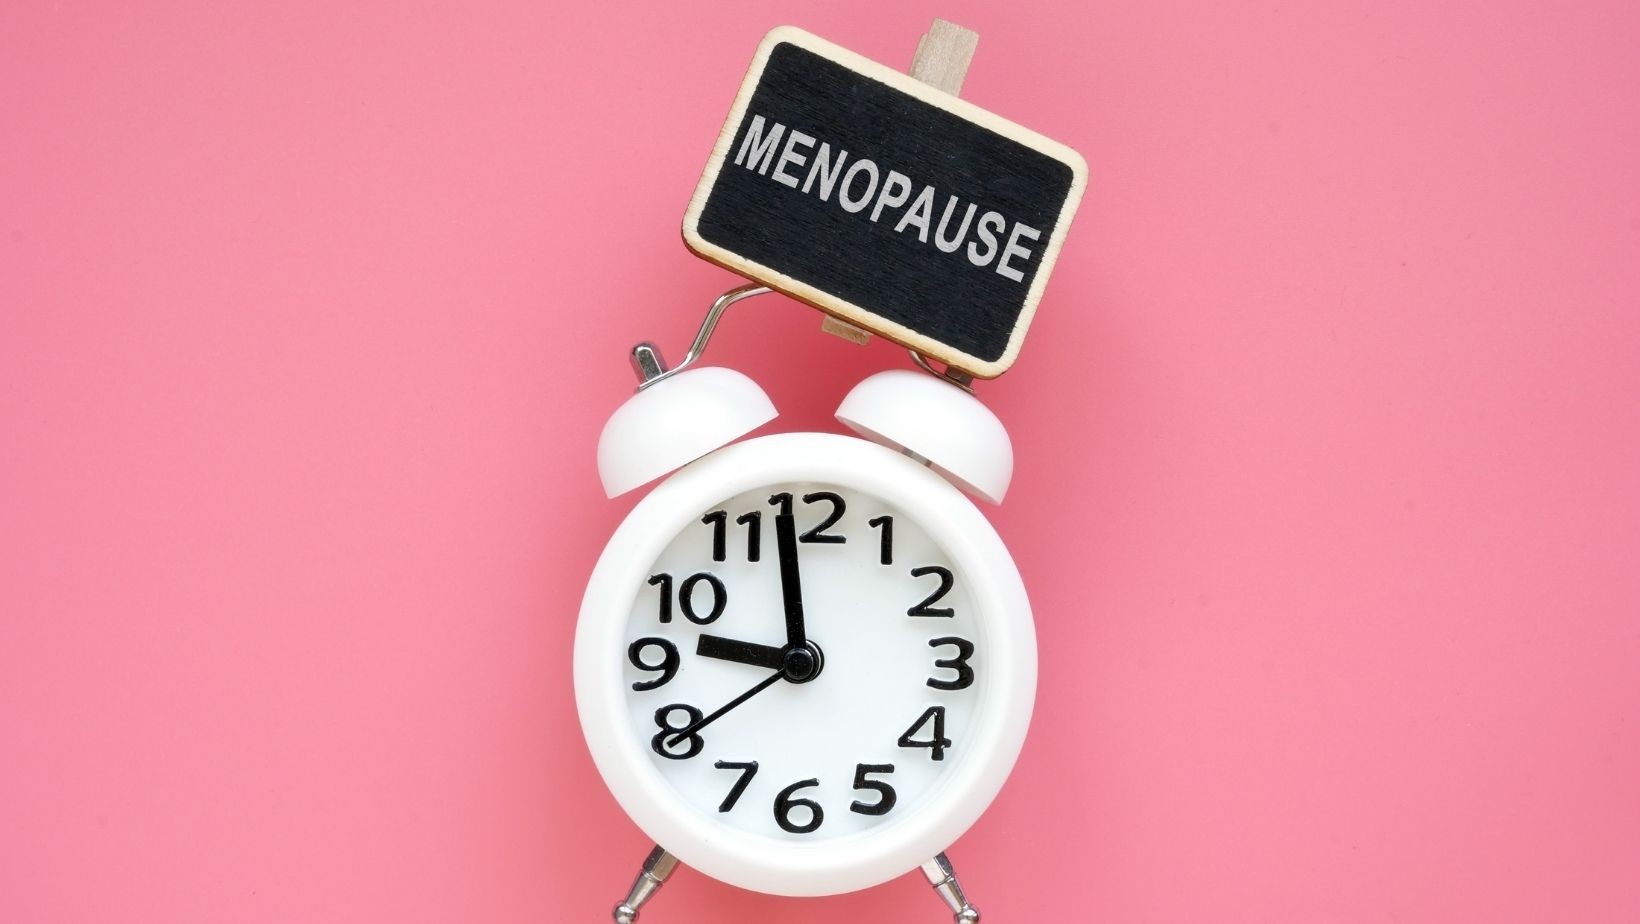 5 Encouraging Facts About Menopause